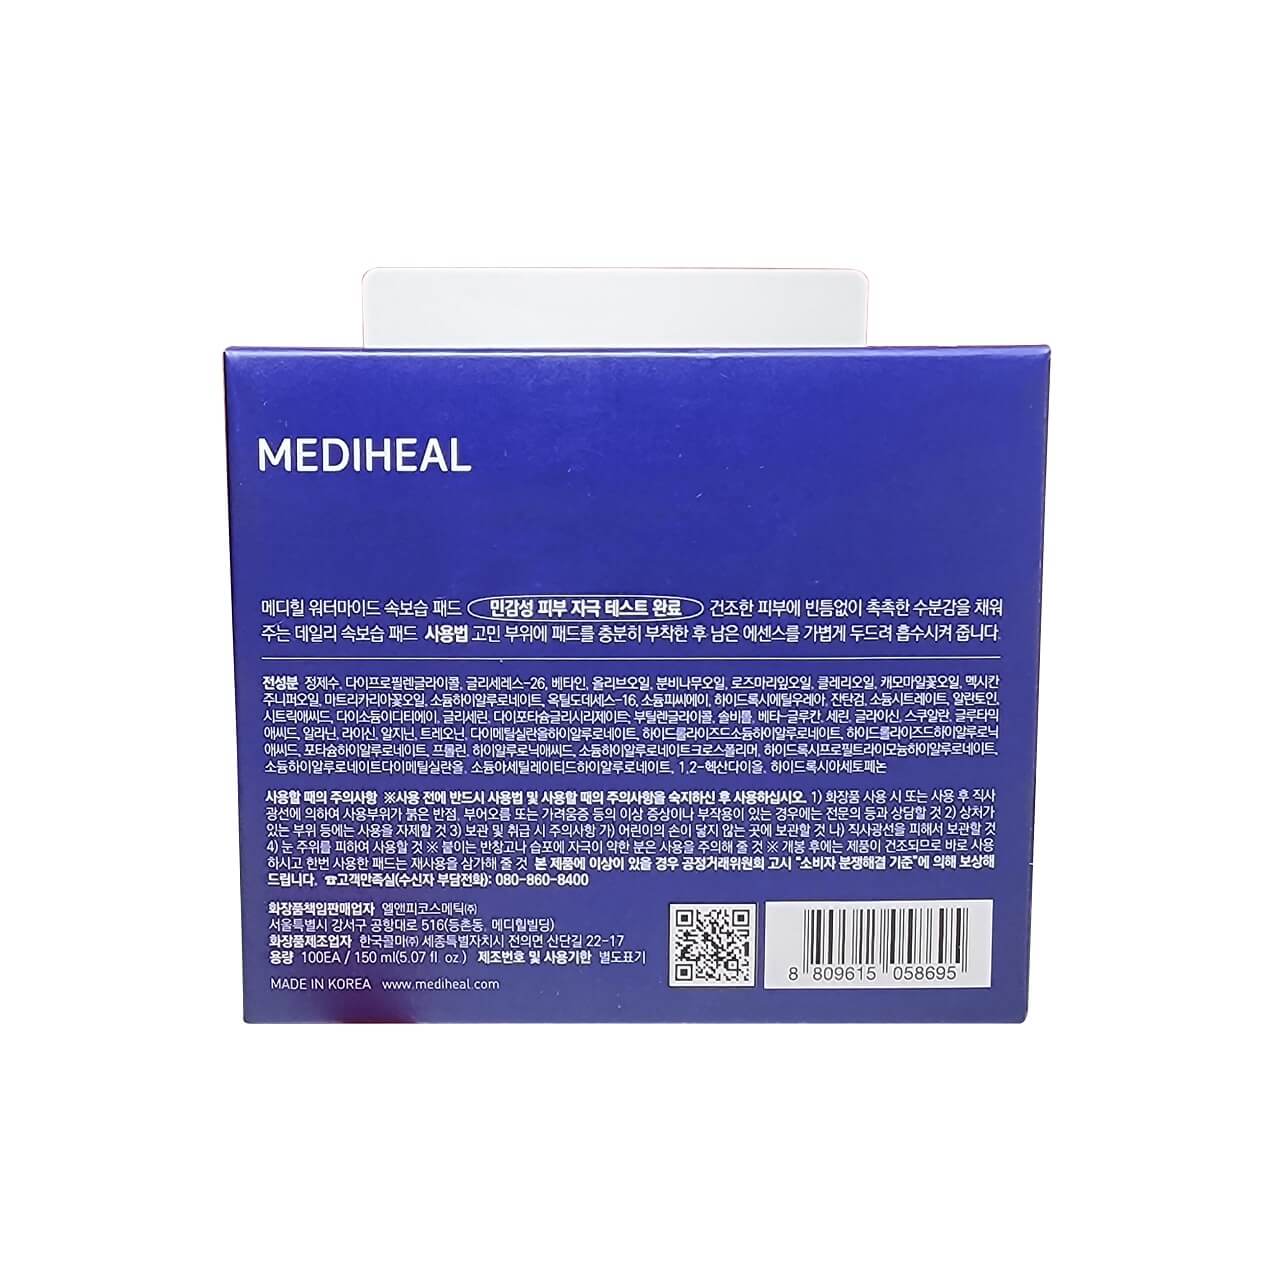 Description, ingredients, cautions, how to use for Mediheal Watermide Moisture Pad (100 count) in Korean